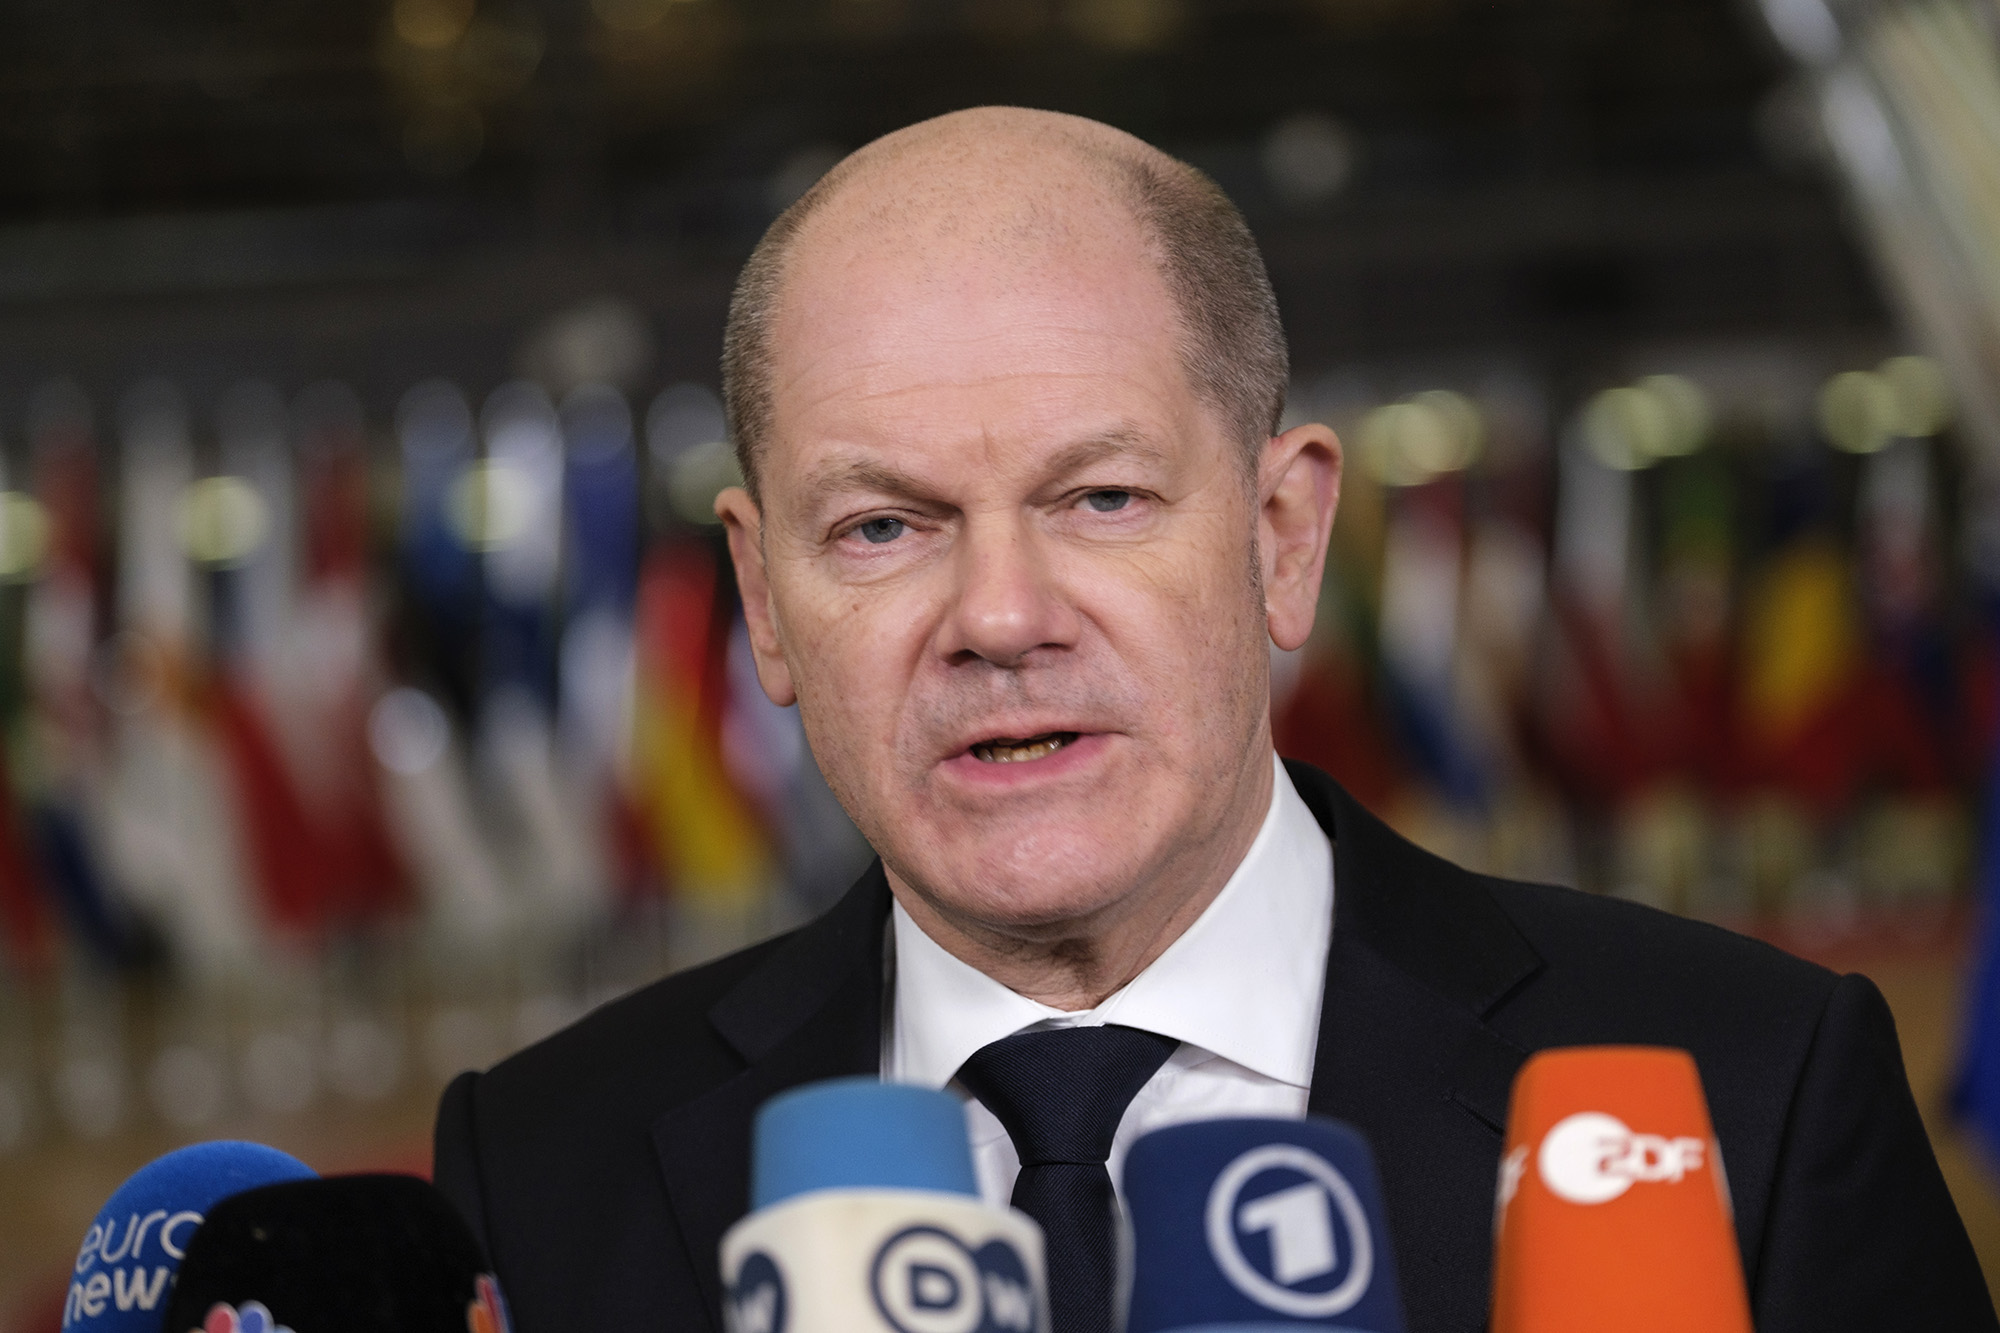 German Chancellor Olaf Scholz talks to the media as he arrives at the EU Council headquarters on February 24, in Brussels, Belgium.